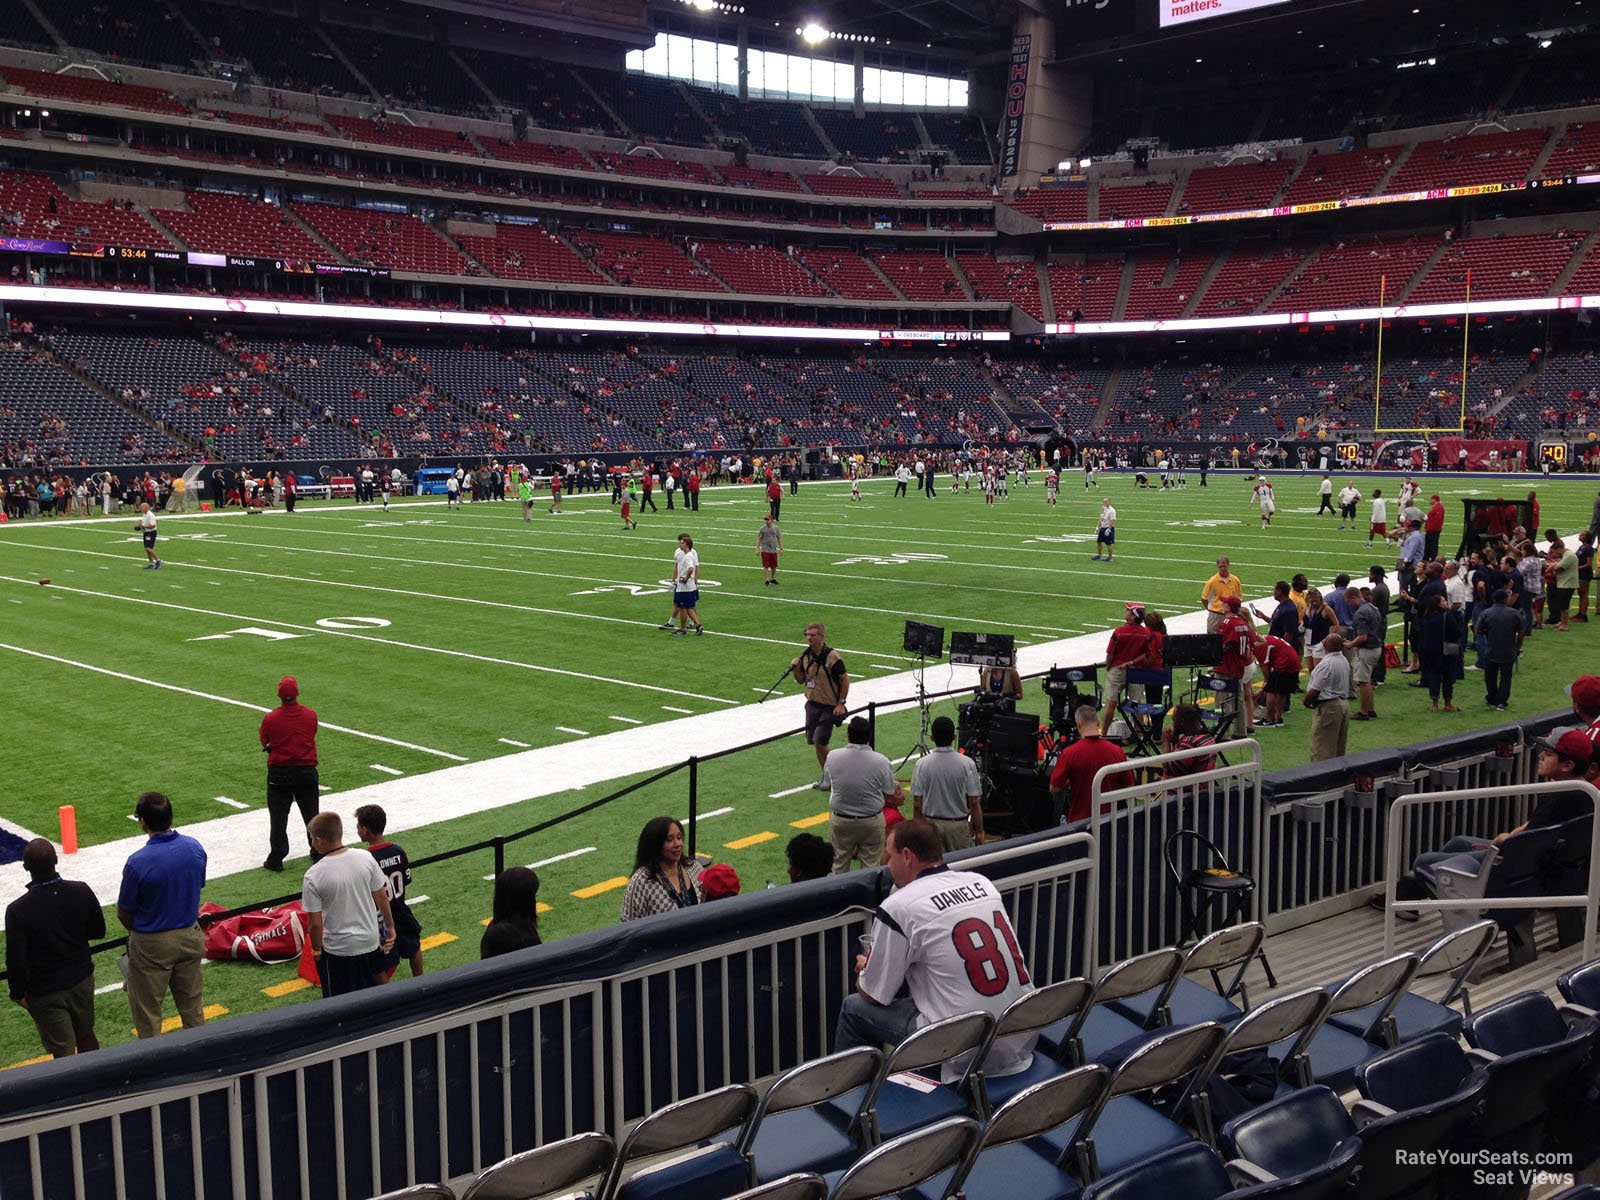 section 131, row c seat view  for football - nrg stadium